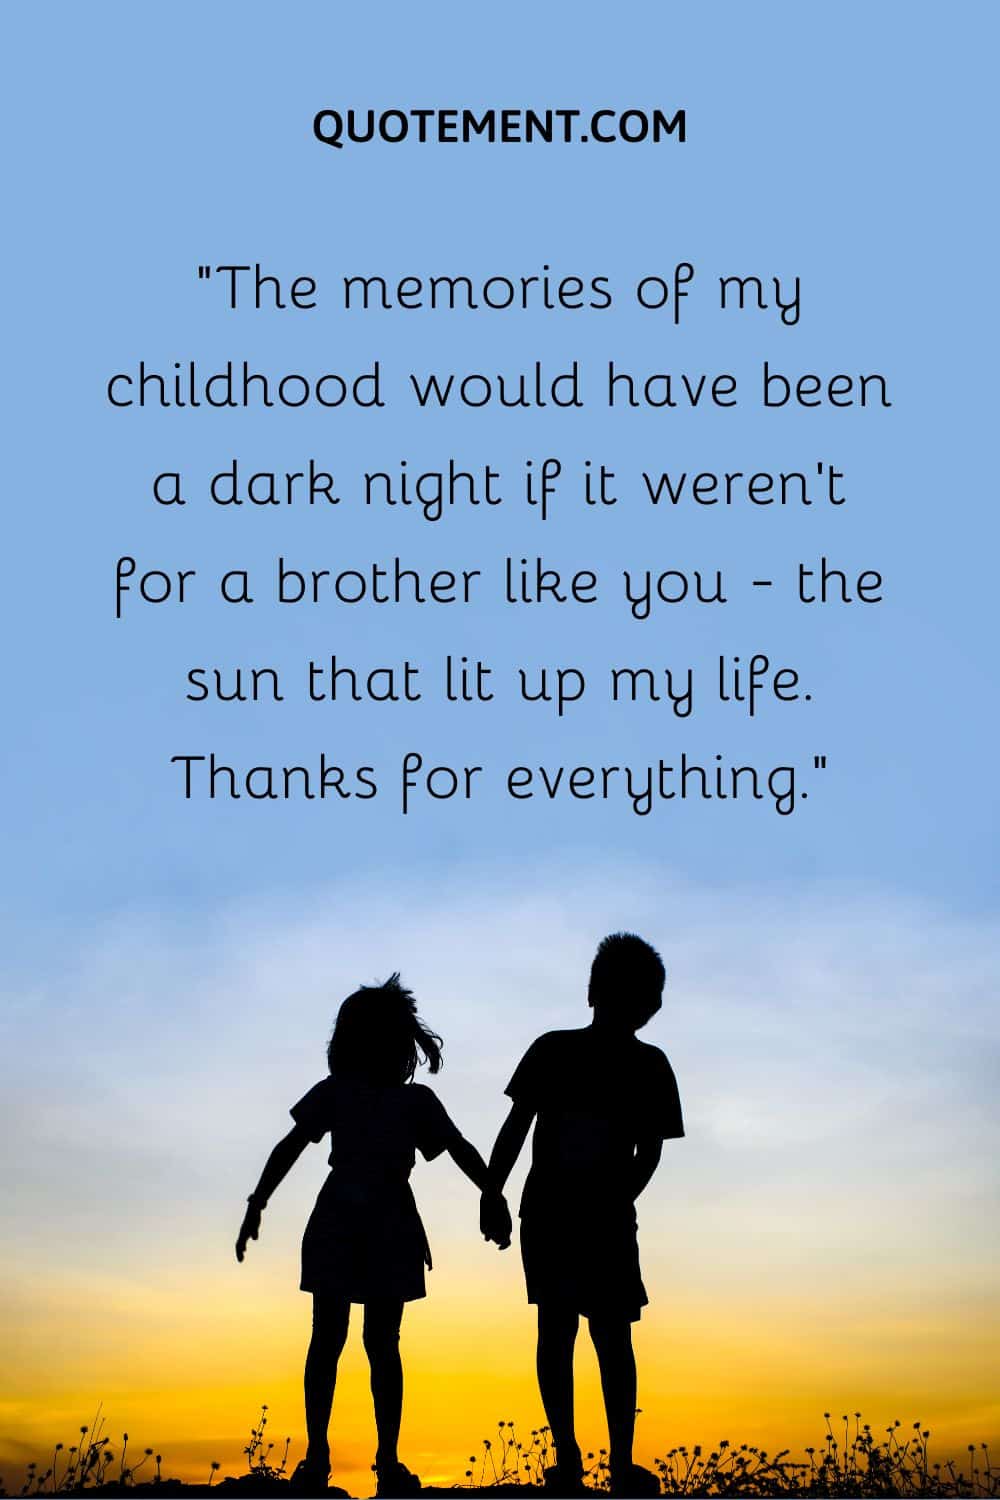 “The memories of my childhood would have been a dark night if it weren’t for a brother like you - the sun that lit up my life. Thanks for everything.”